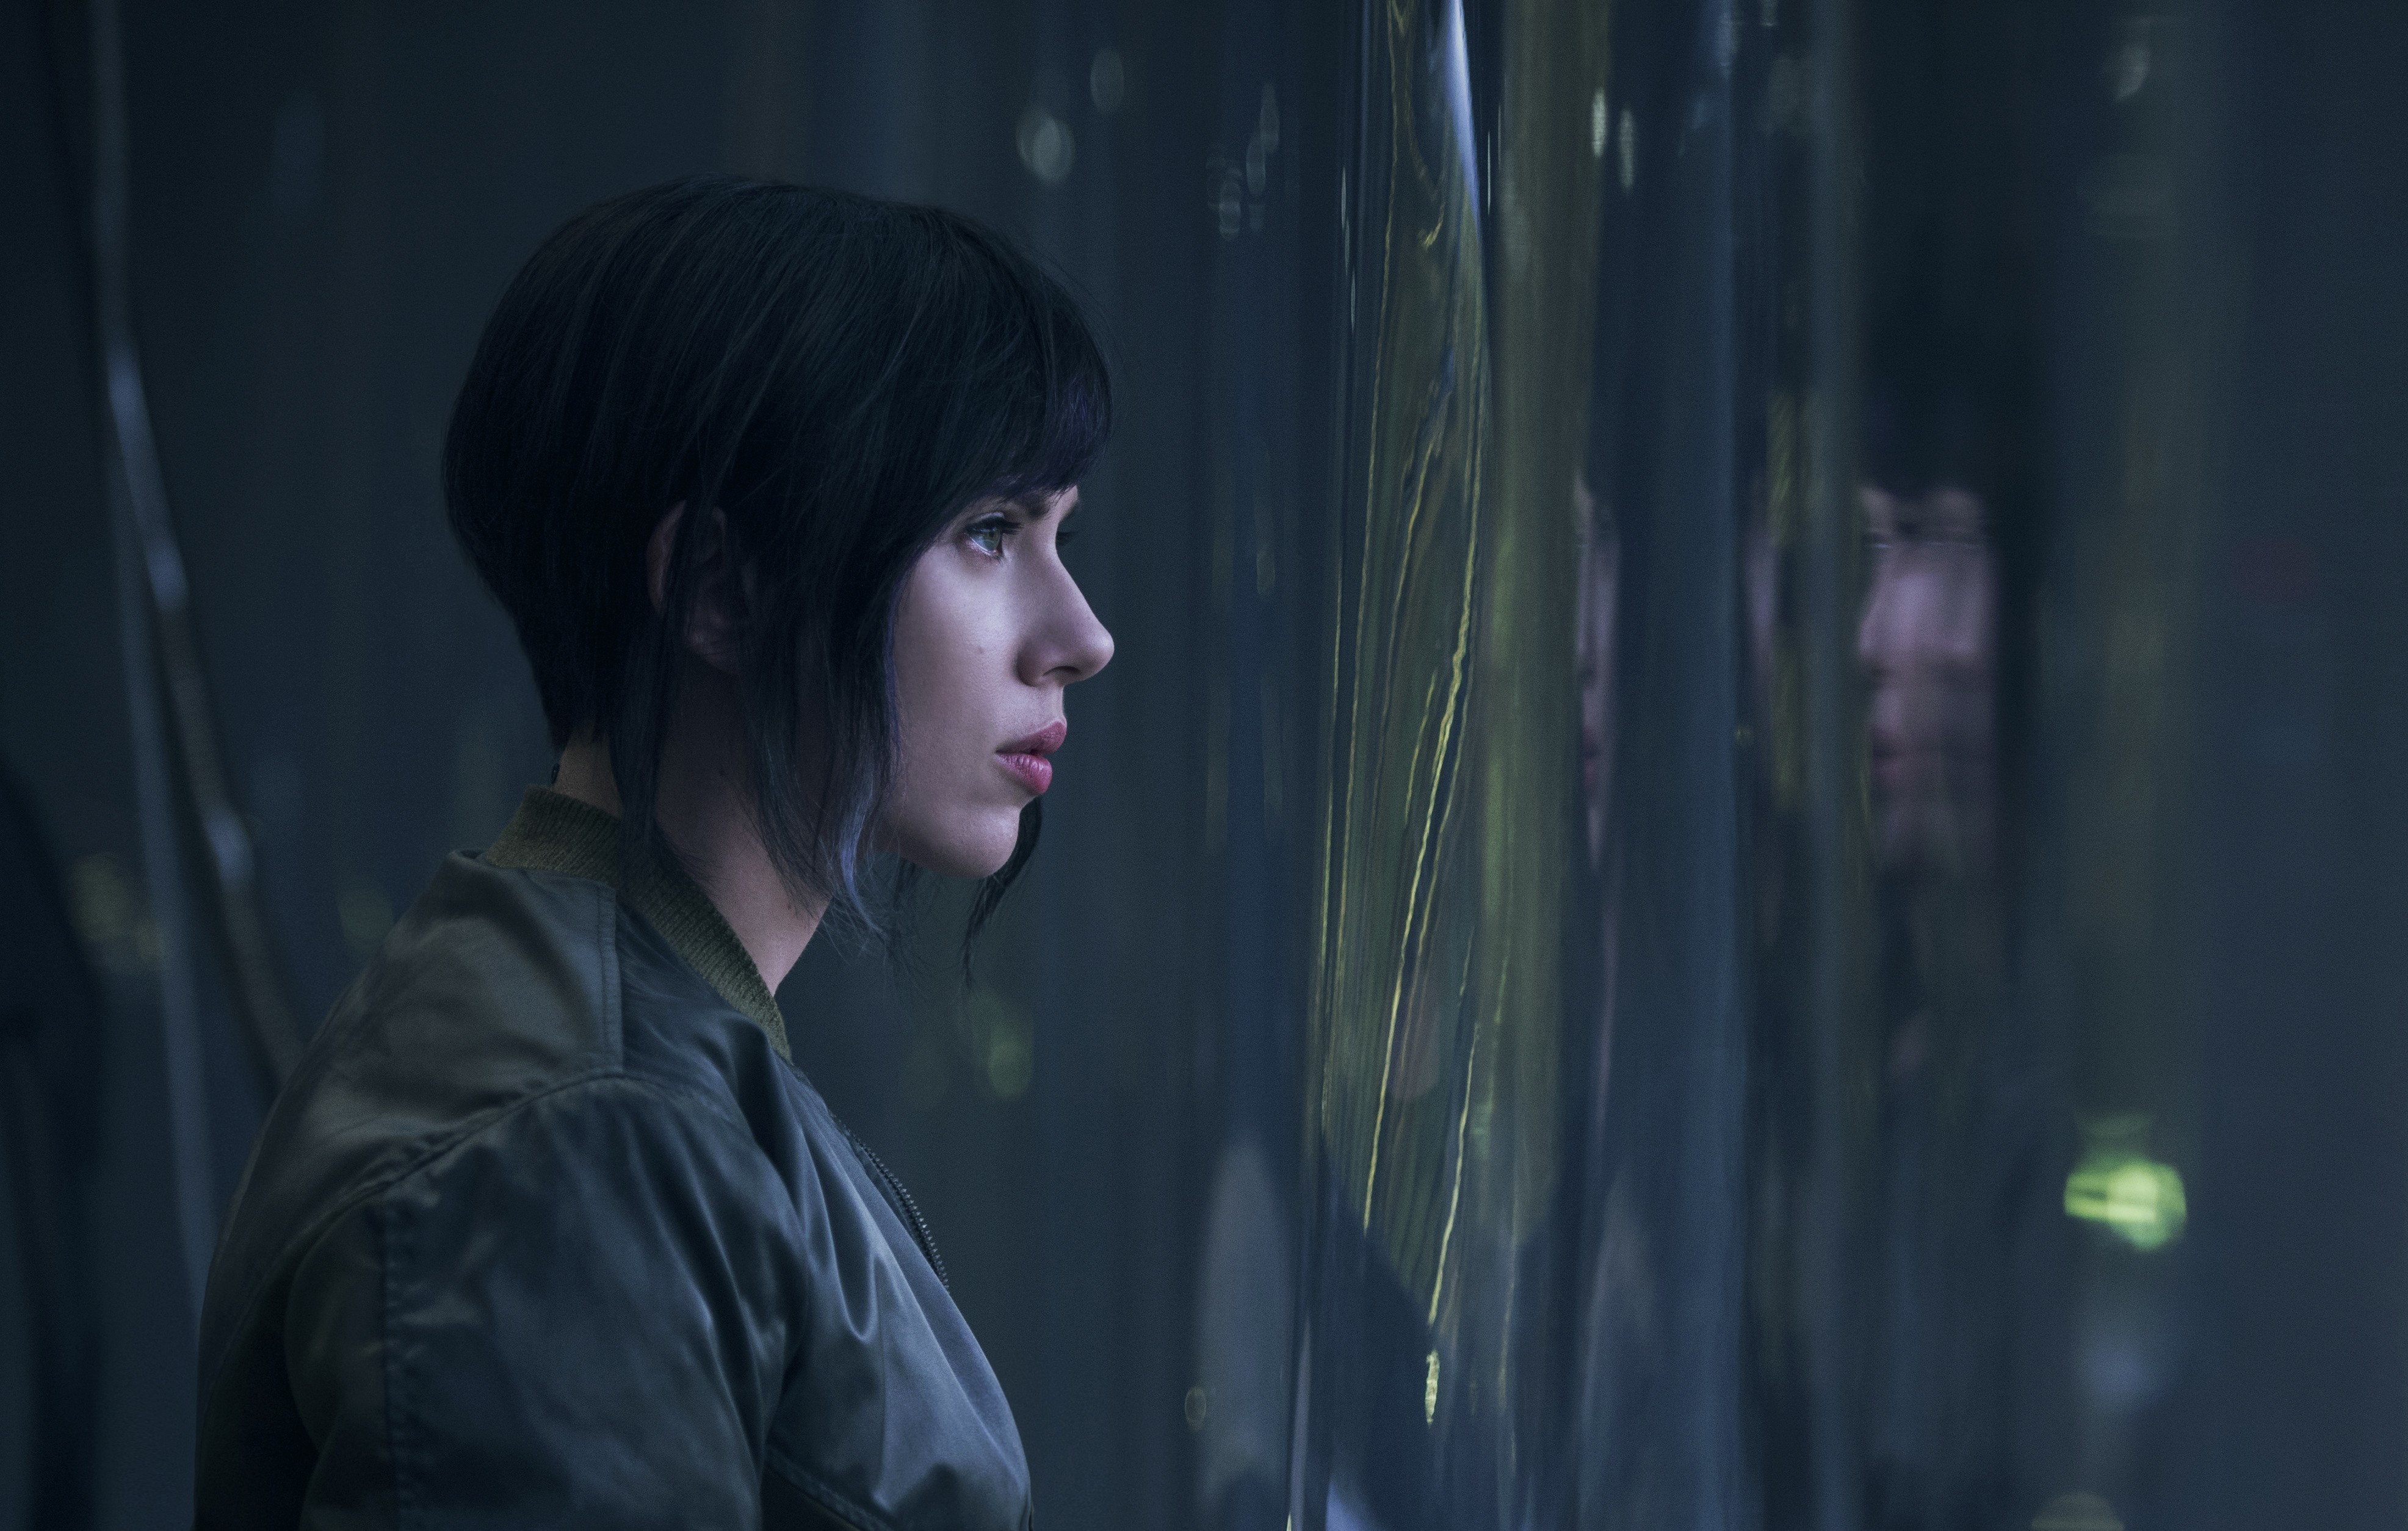 Movie Ghost in the Shell (2017) HD Wallpaper | Background Image